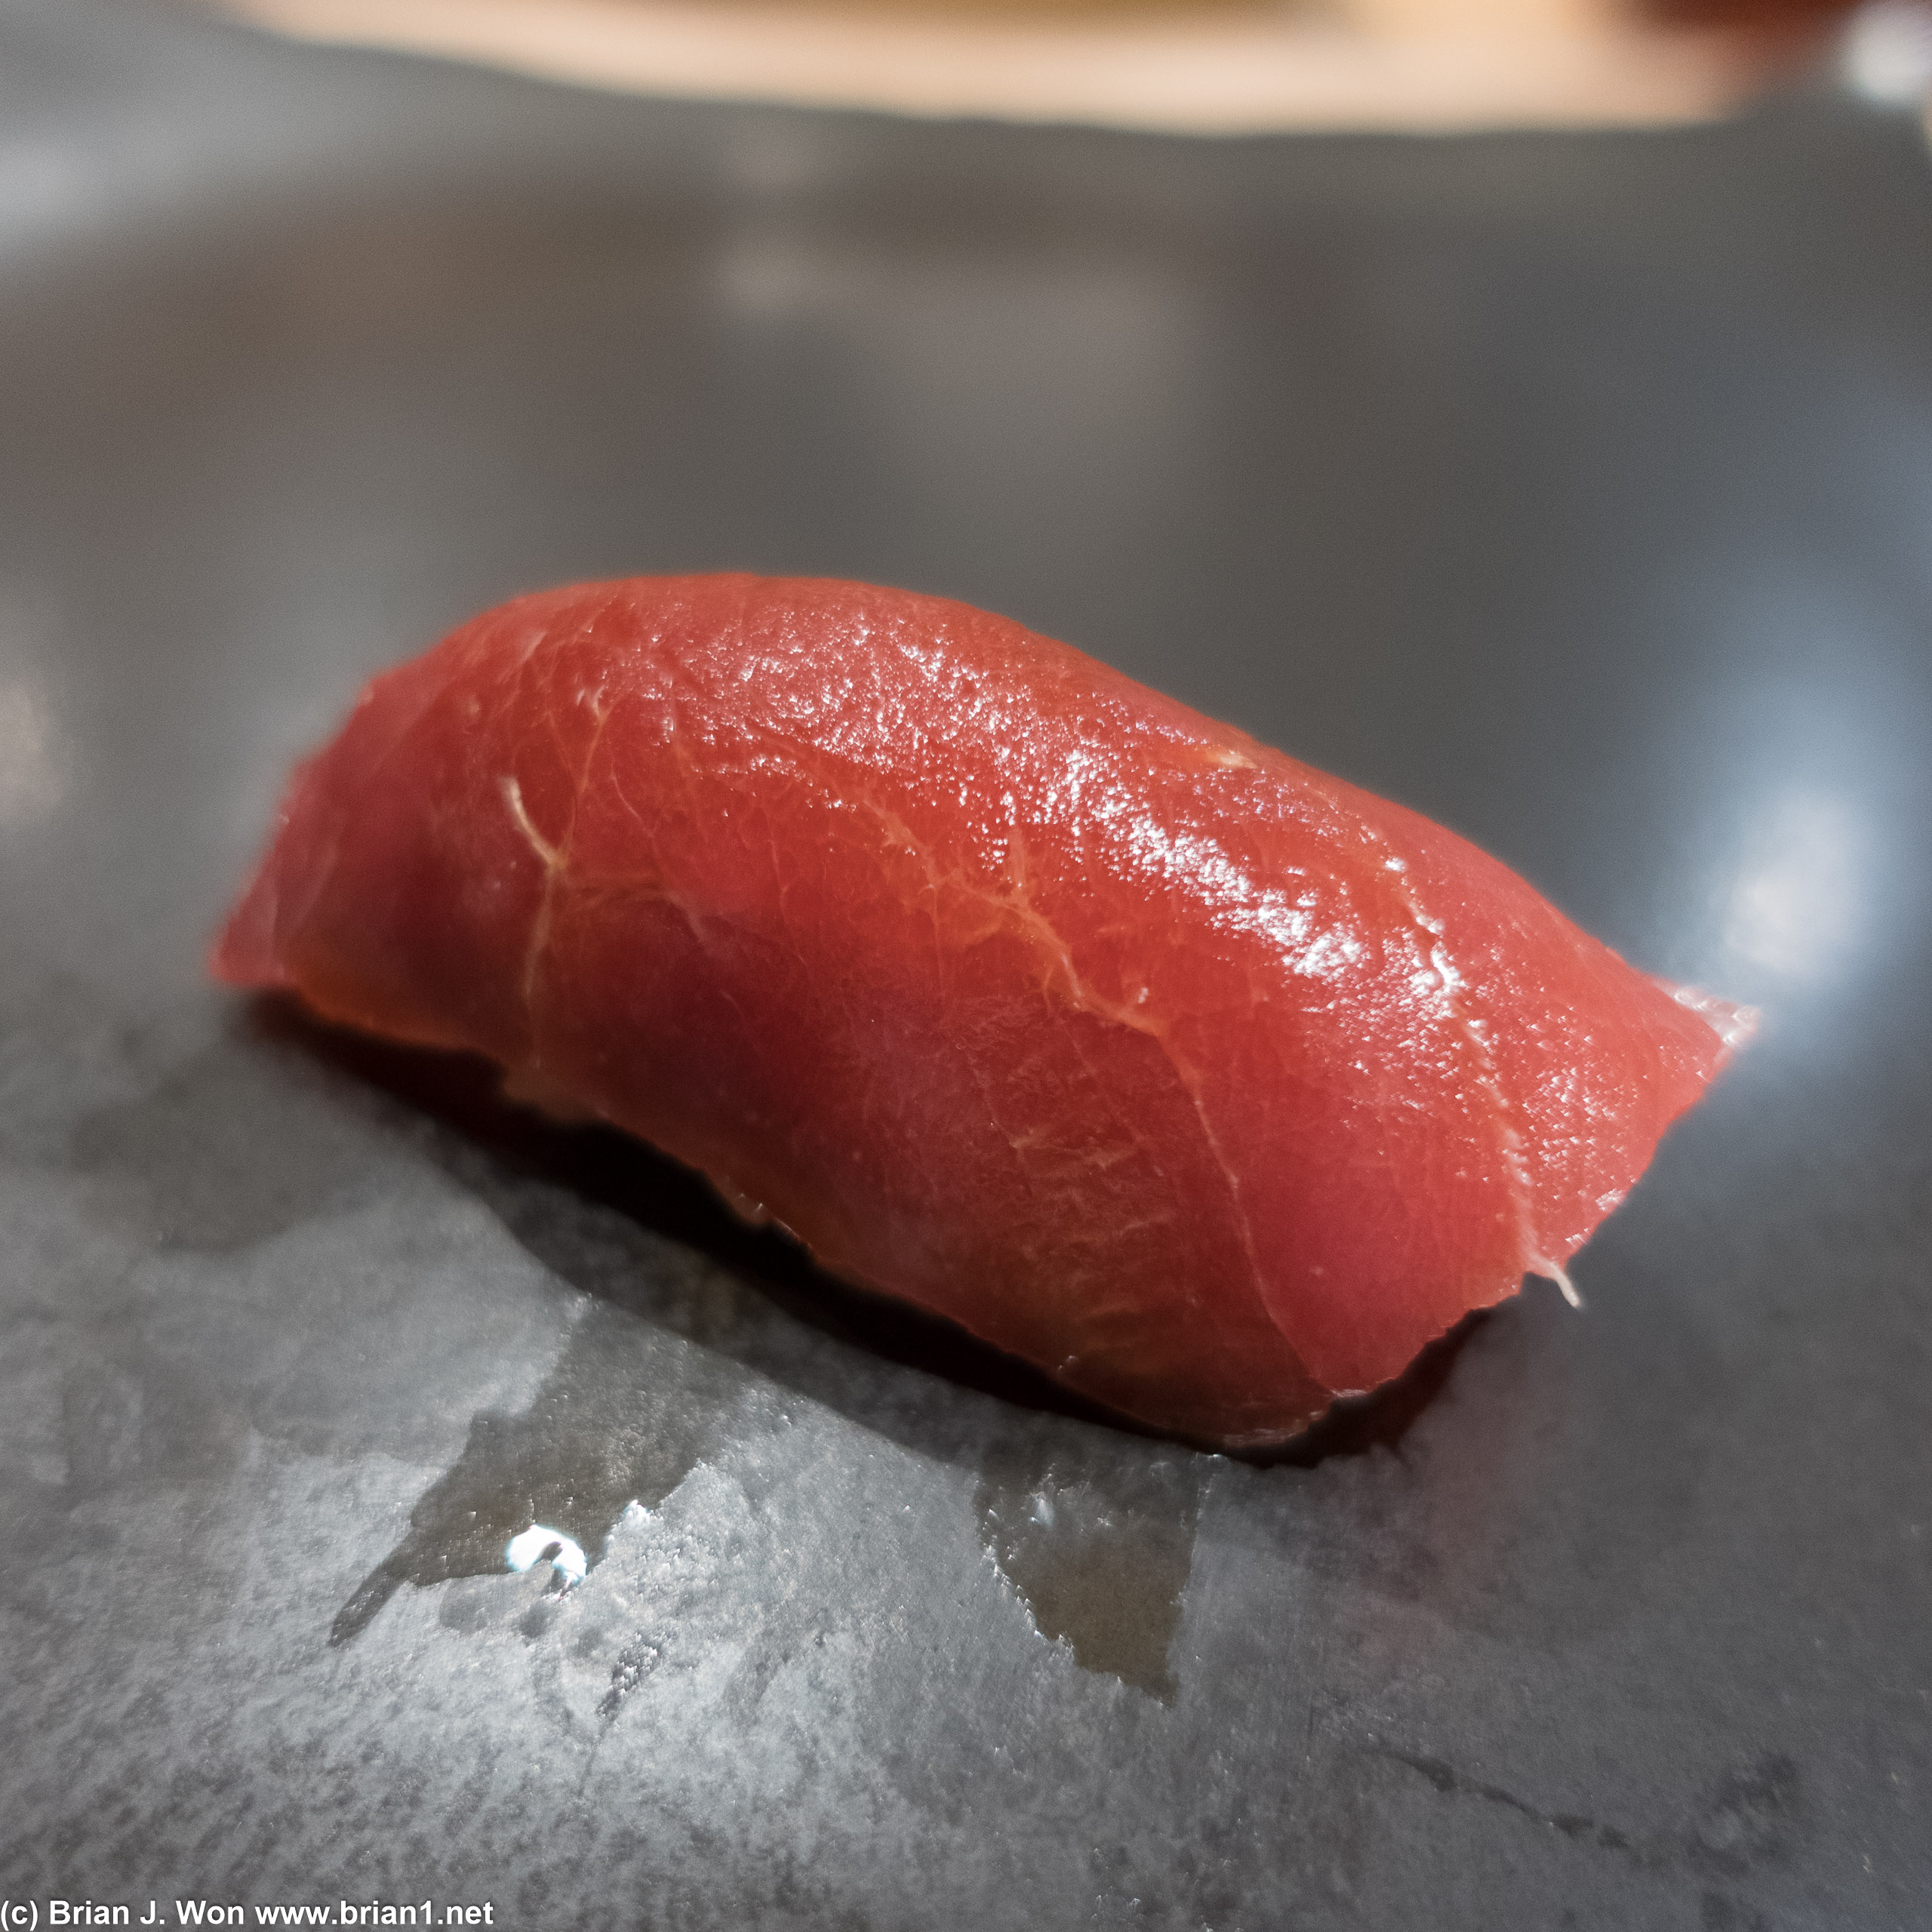 Akami - the main part of bluefin tuna (lean red meat).